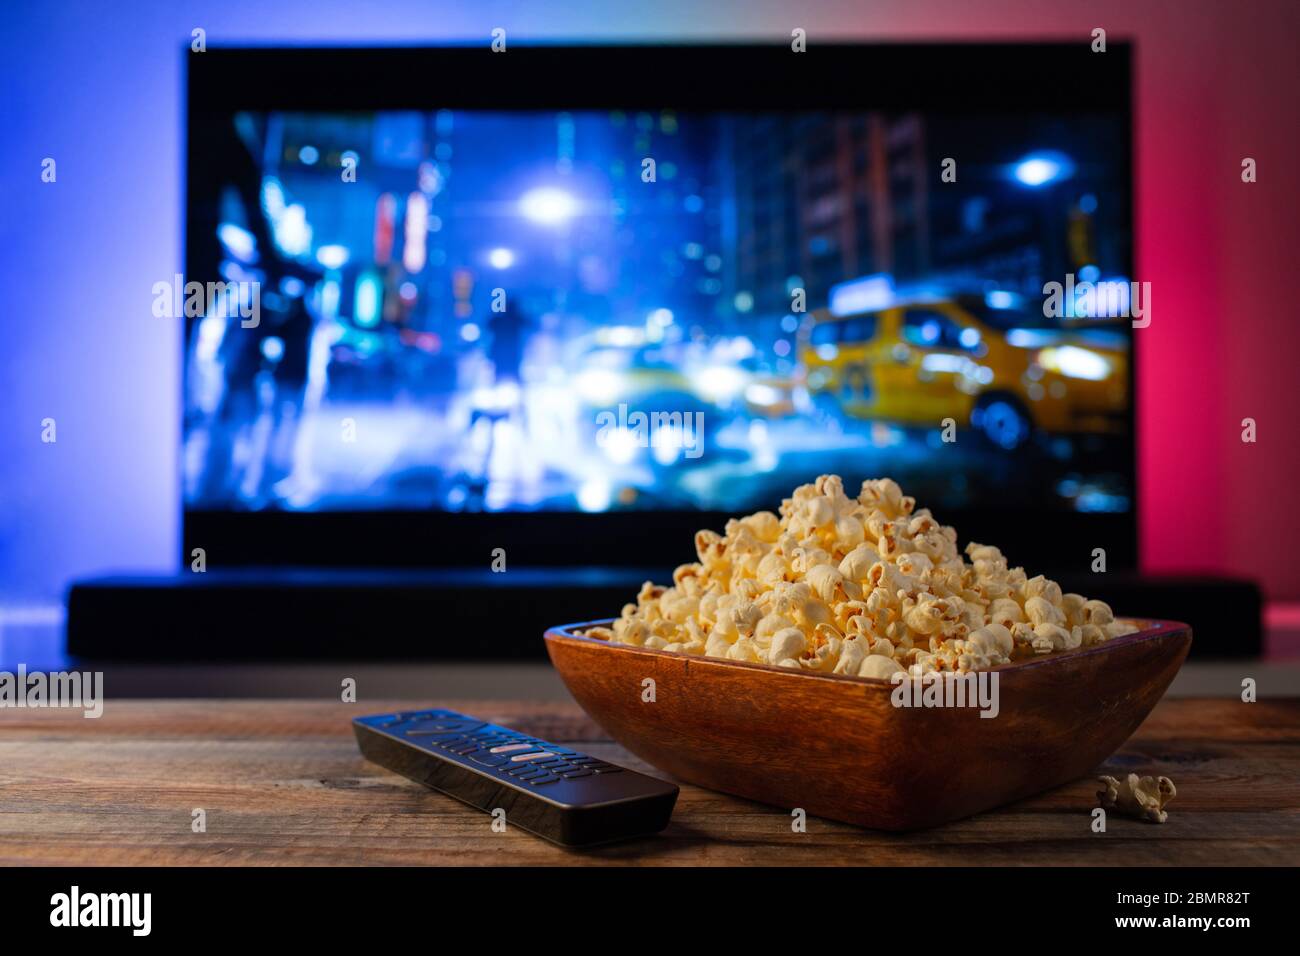 A wooden bowl of popcorn and remote control in the background the TV works.  Evening cozy watching a movie or TV series at home Stock Photo - Alamy